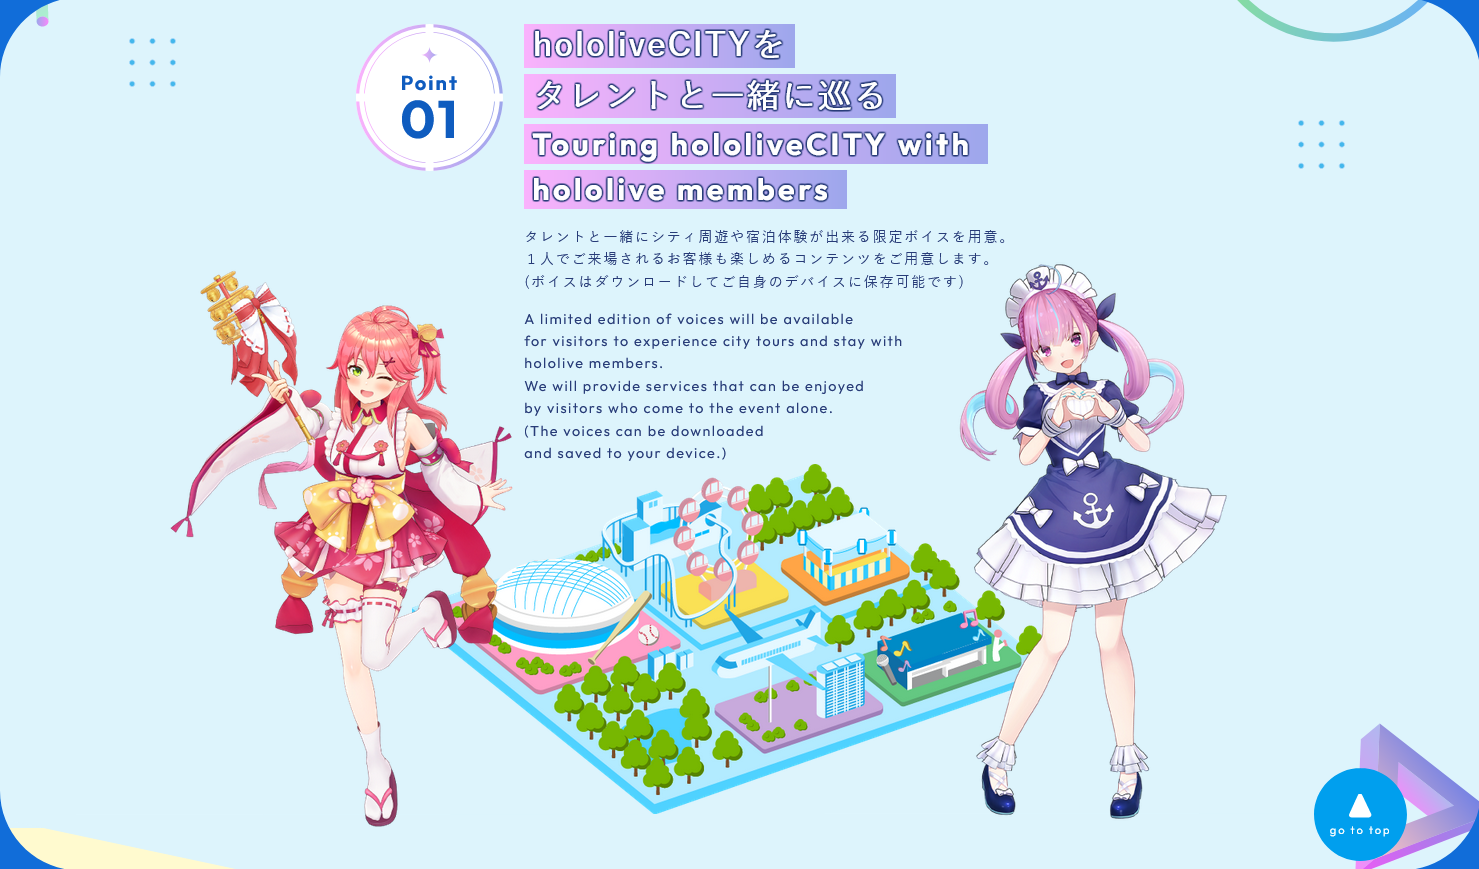 hololive-city-hololive-airline-1.png